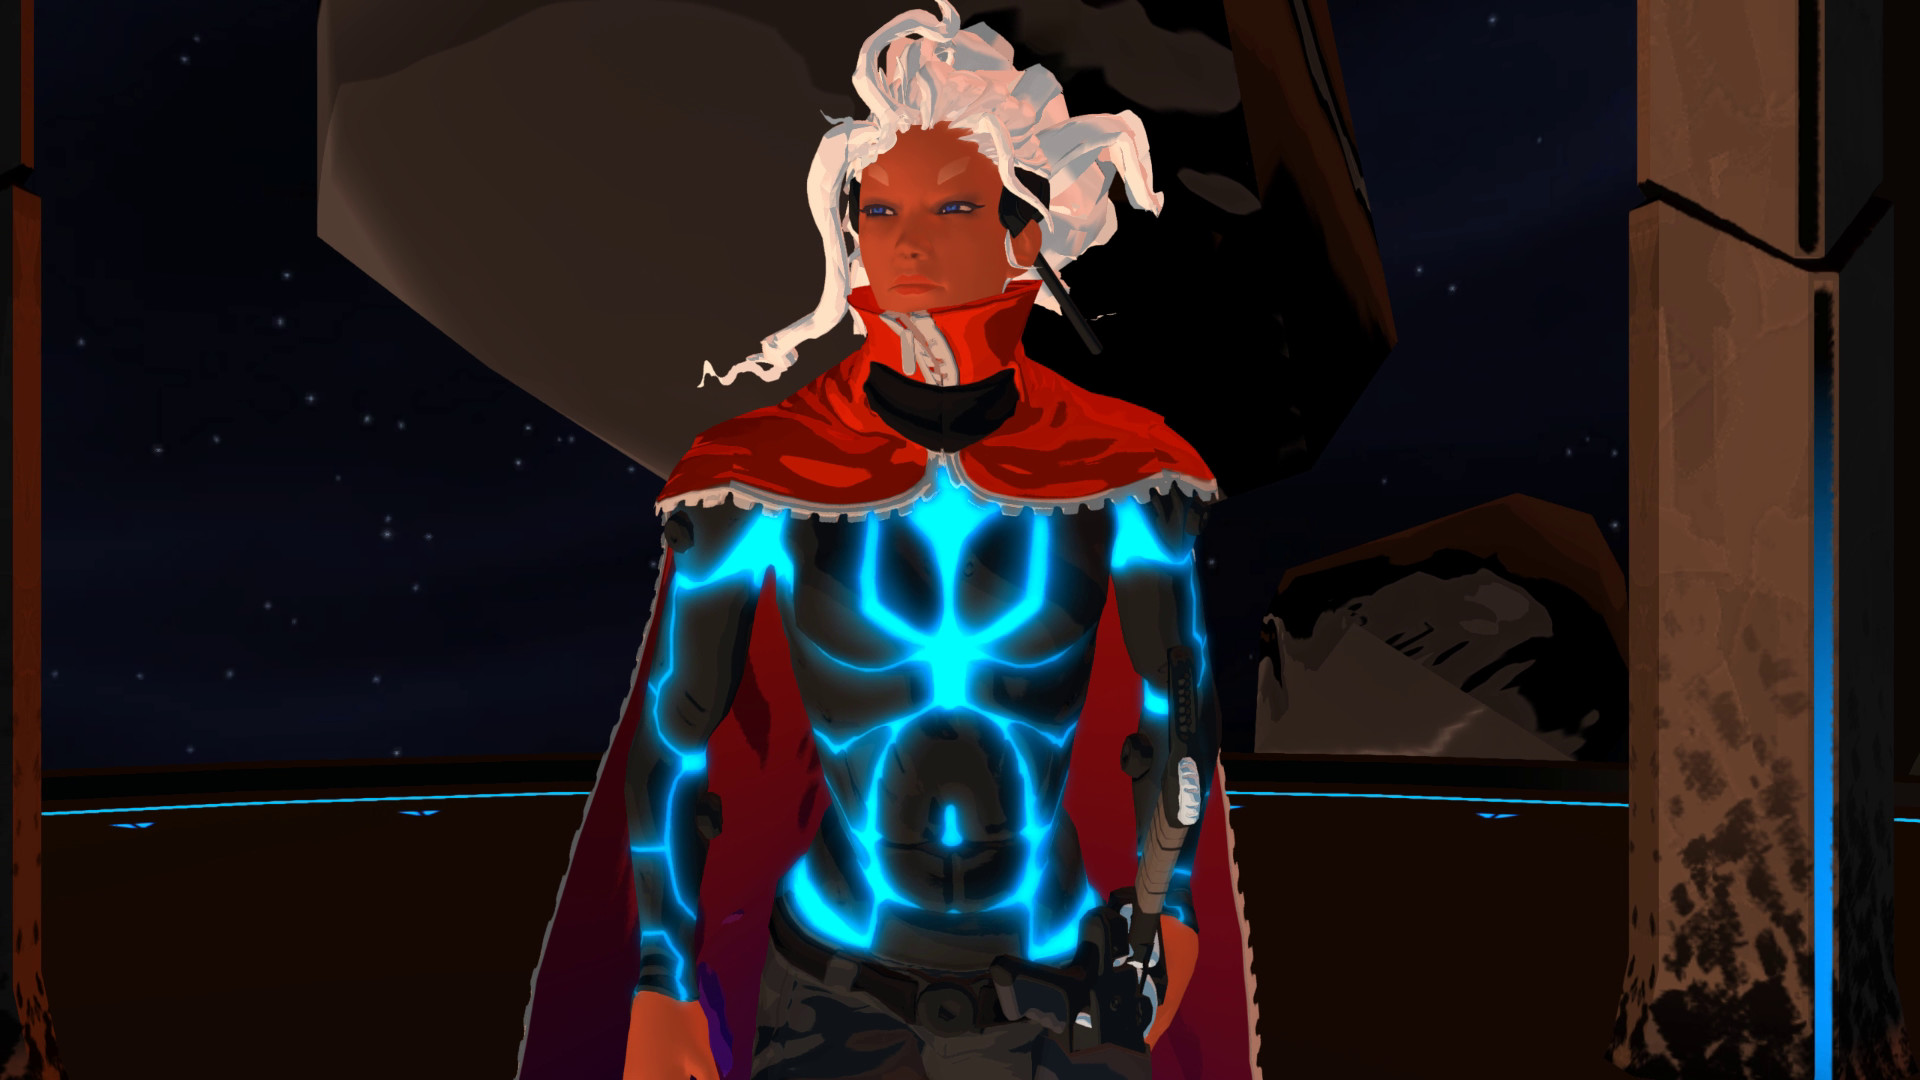 On May 17, an add-on with a new fighter and an update with previously released content will be released for Furi